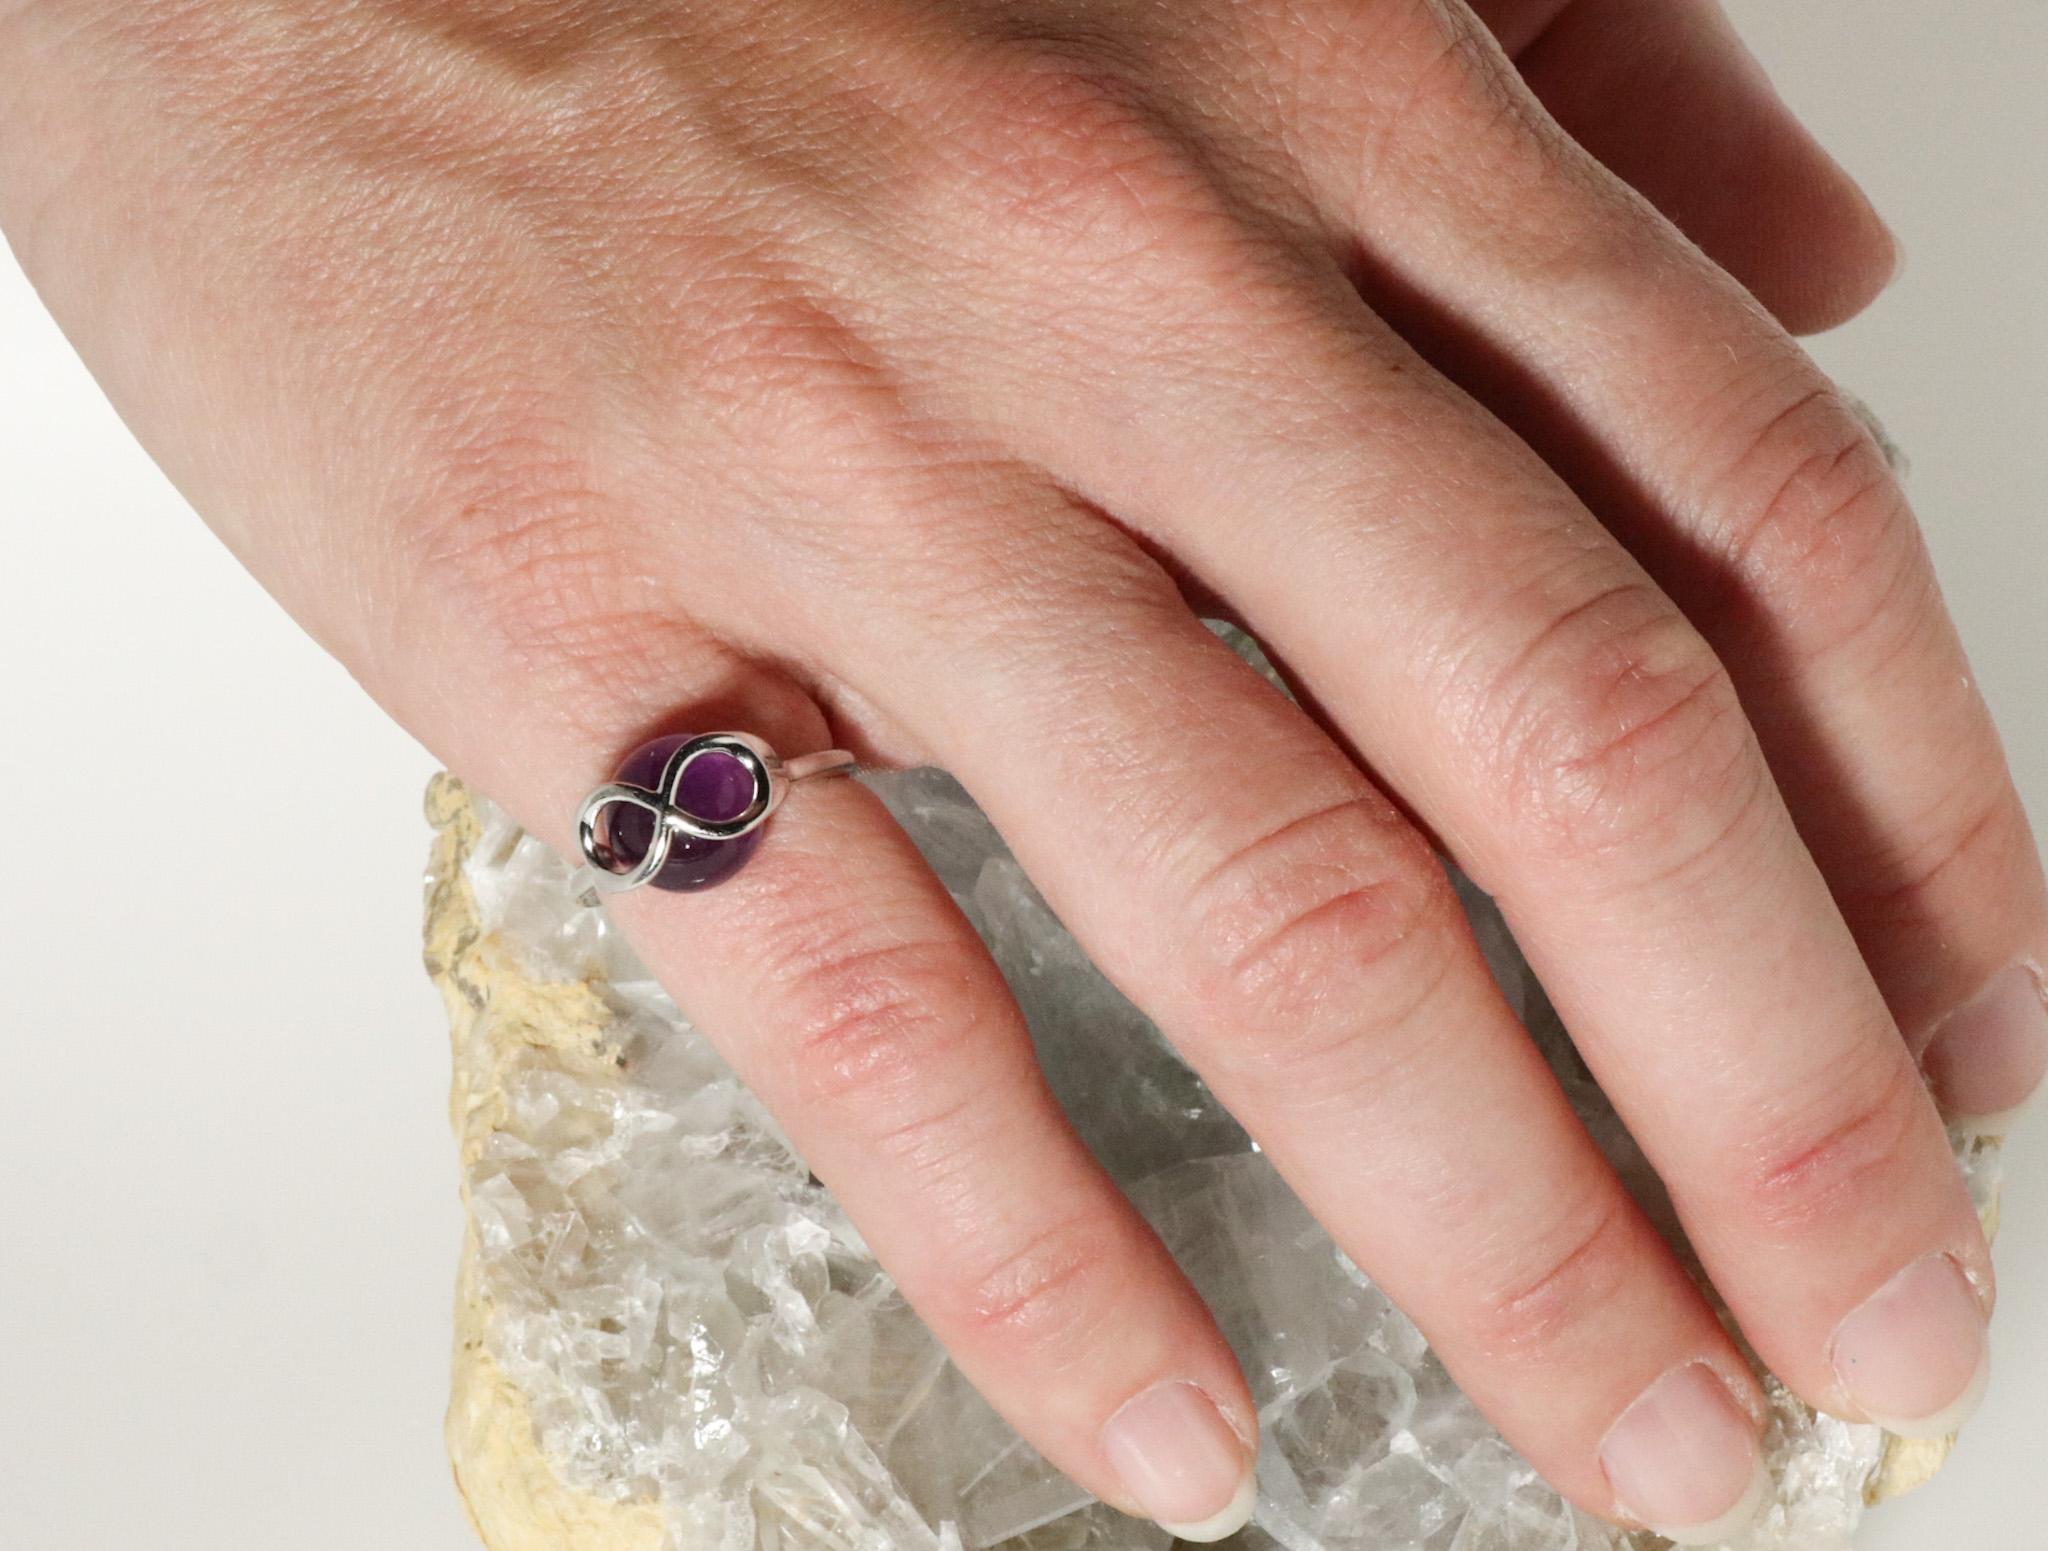 The Infinite Magic of Gems cocktail ring is designed with the Infinity Symbol Iand the gems are interchangeable. It is made of 18 karat white gold and features an half drilled ball cut amethyst around 6.65 carats, diameter 9.85 mm. The total weight